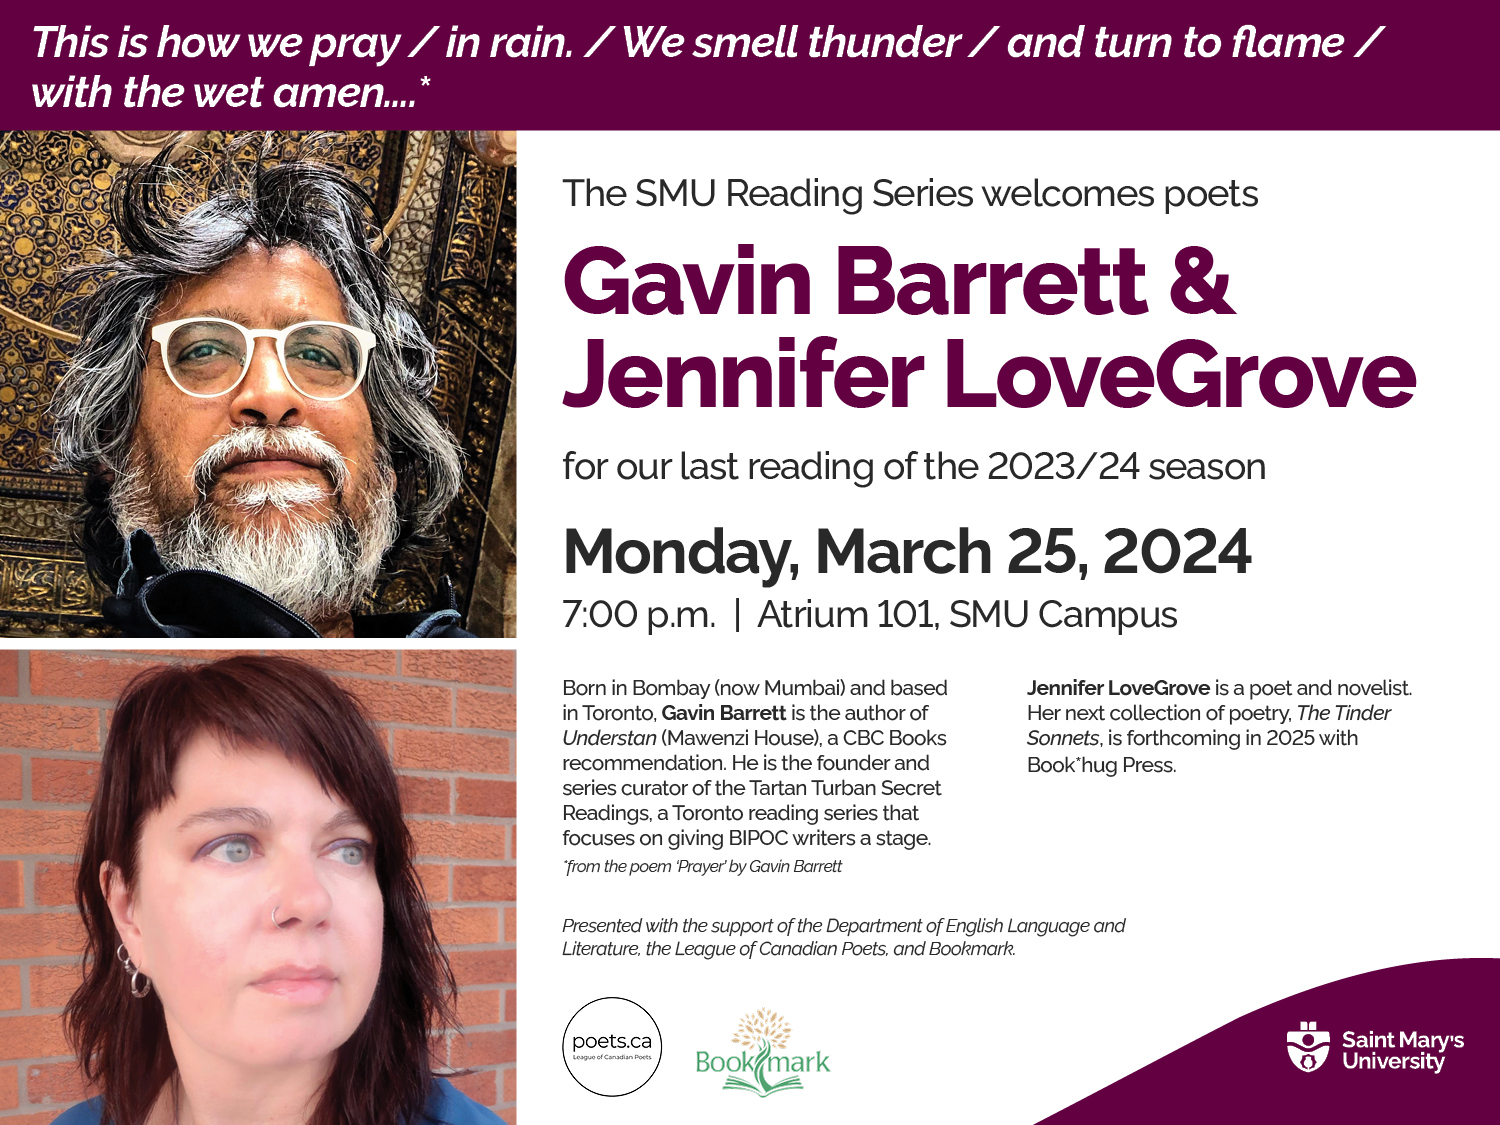 A SMU Reading Series poster promoting the last event of its 2023/24 season with poets Gavin Barret and Jennifer LoveGrove on Monday, March, 25, 2024 at 07:00 pm in Atrium 101. Gavin and Jennifer's photos are on the left side of the poster.